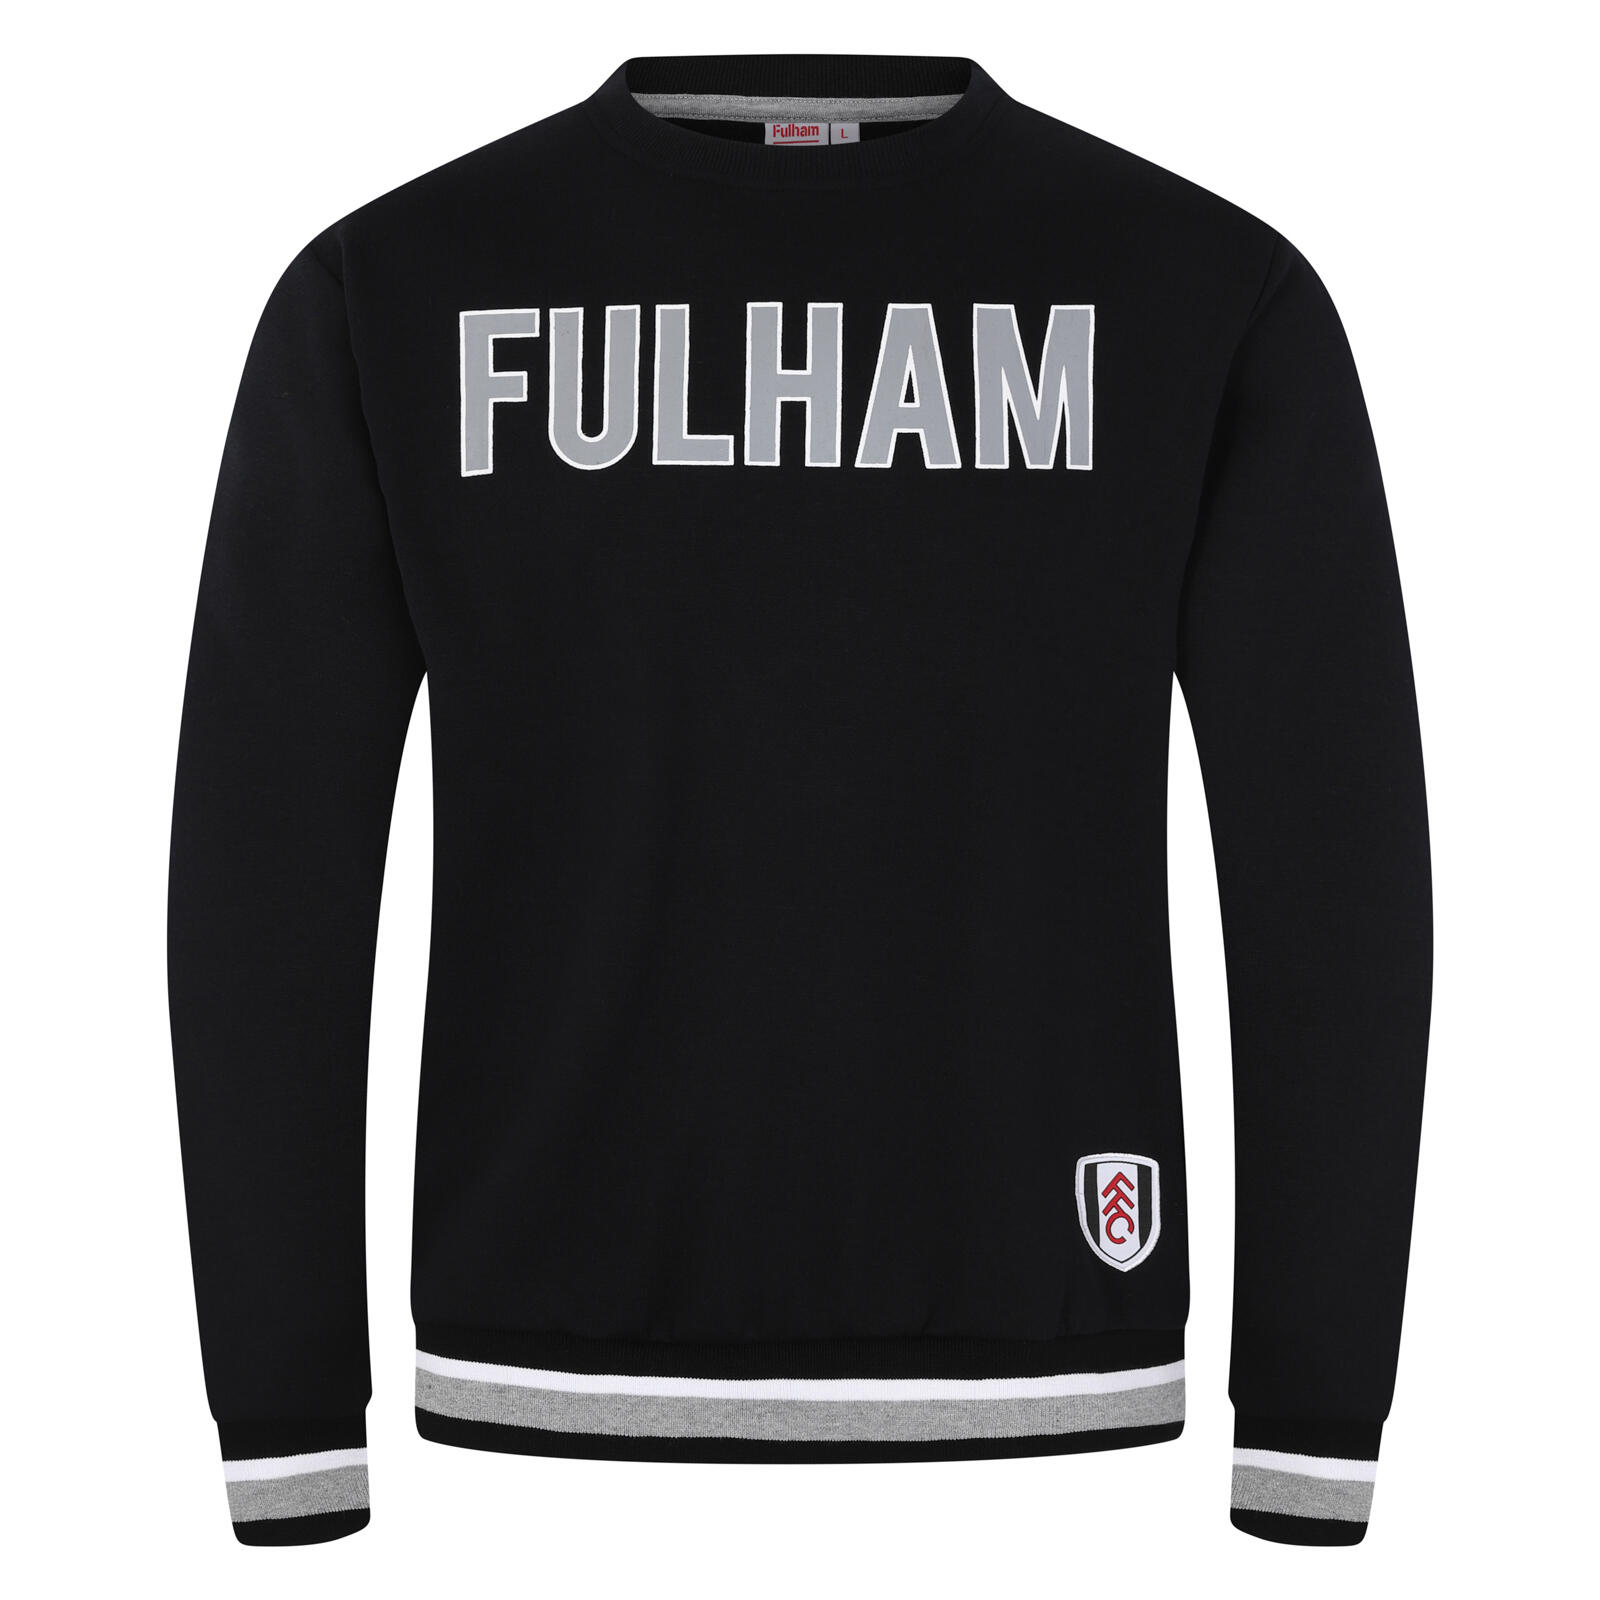 FULHAM FC Fulham FC Mens Sweatshirt Graphic Top OFFICIAL Football Gift